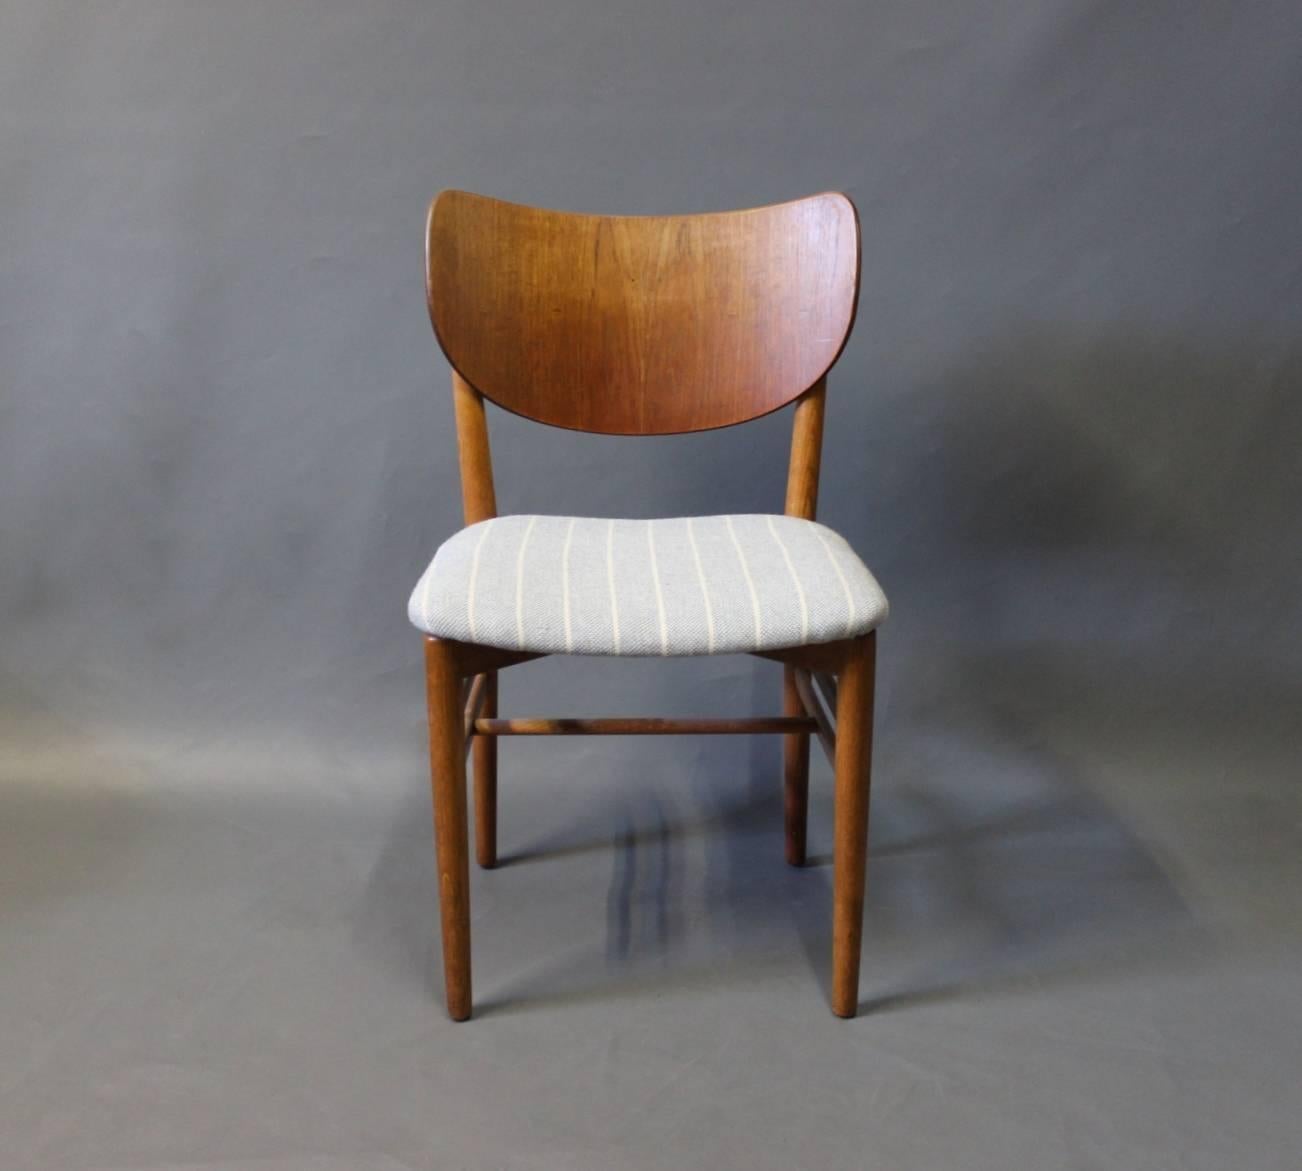 A set of four dining room chairs designed by Nils and Eva Koppel in the 1960s. The chairs are of teak and upholstered in light wool.